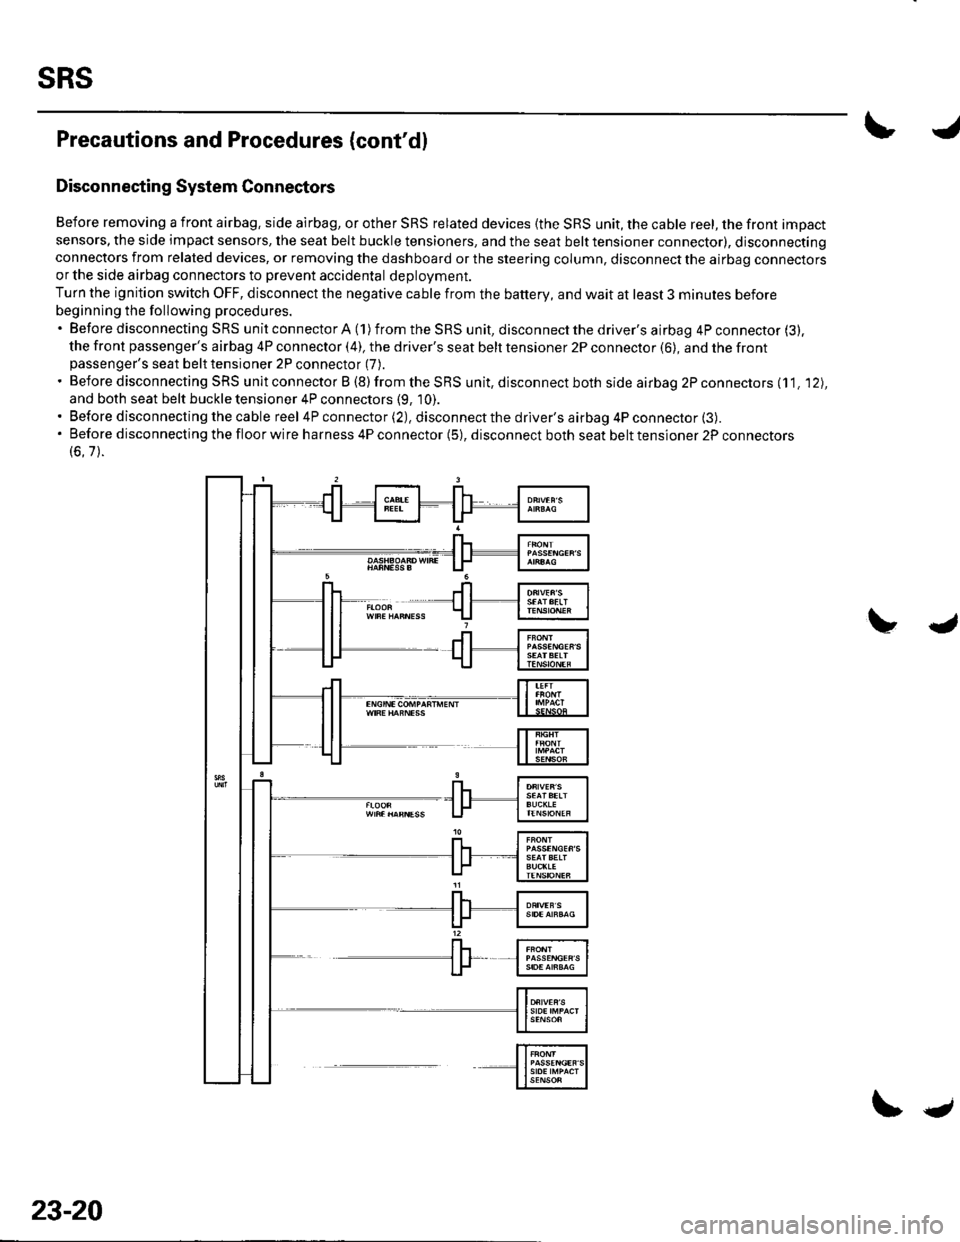 HONDA CIVIC 2003 7.G Workshop Manual sRs
Precautions and Procedures (contdl
Disconnecting System Connectors
Before removing a front airbag. side airbag, or other SRS related devices {the SRS unit, the cable reel, the front impact
sensor